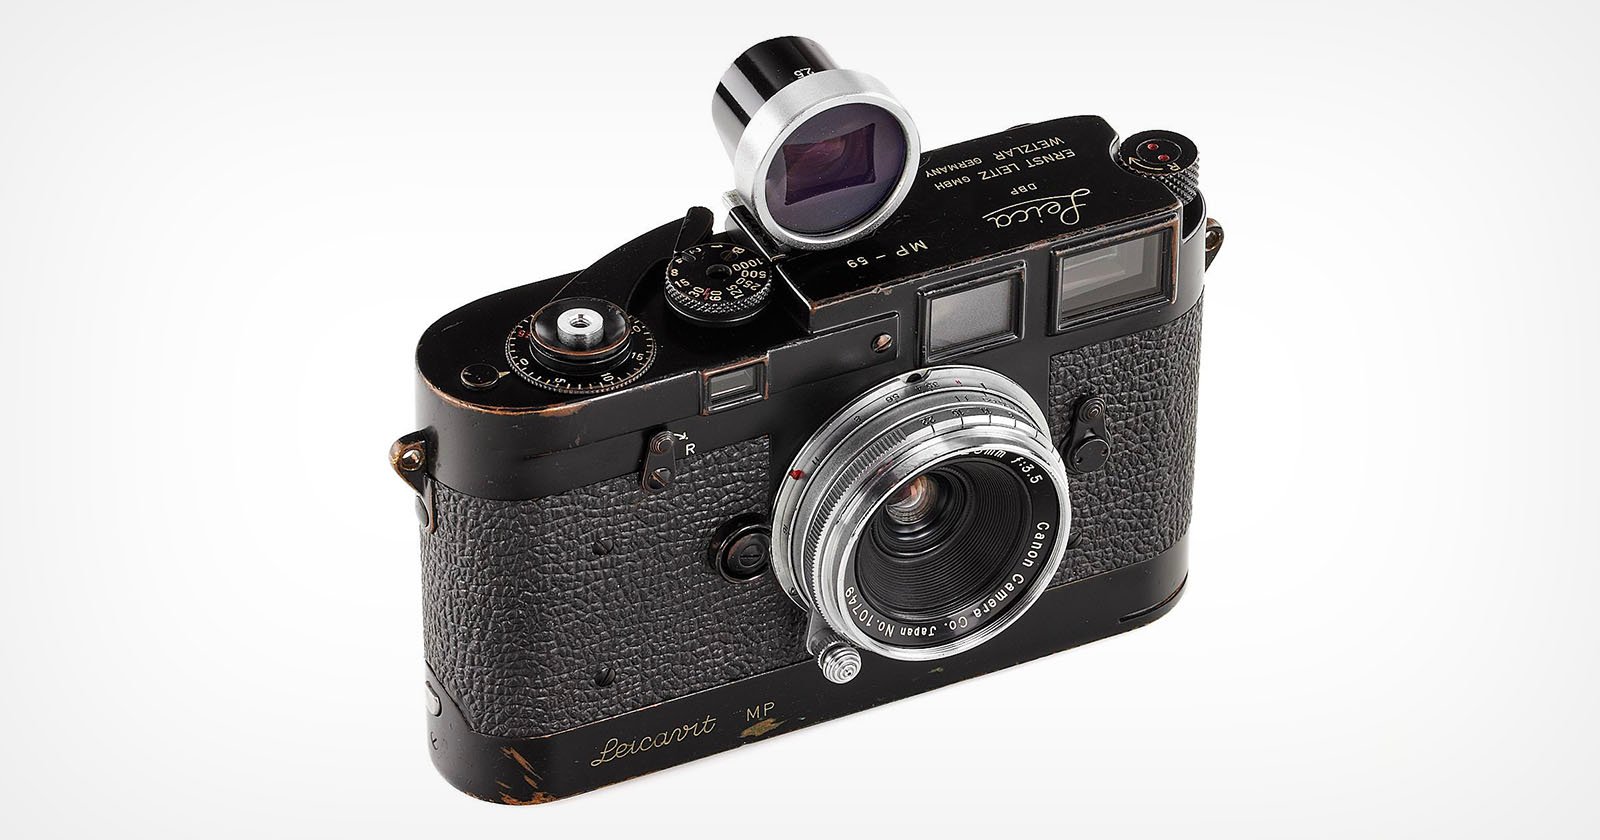 Yul Brynners Leica Cameras Headline 43rd Leitz Photographica Auction